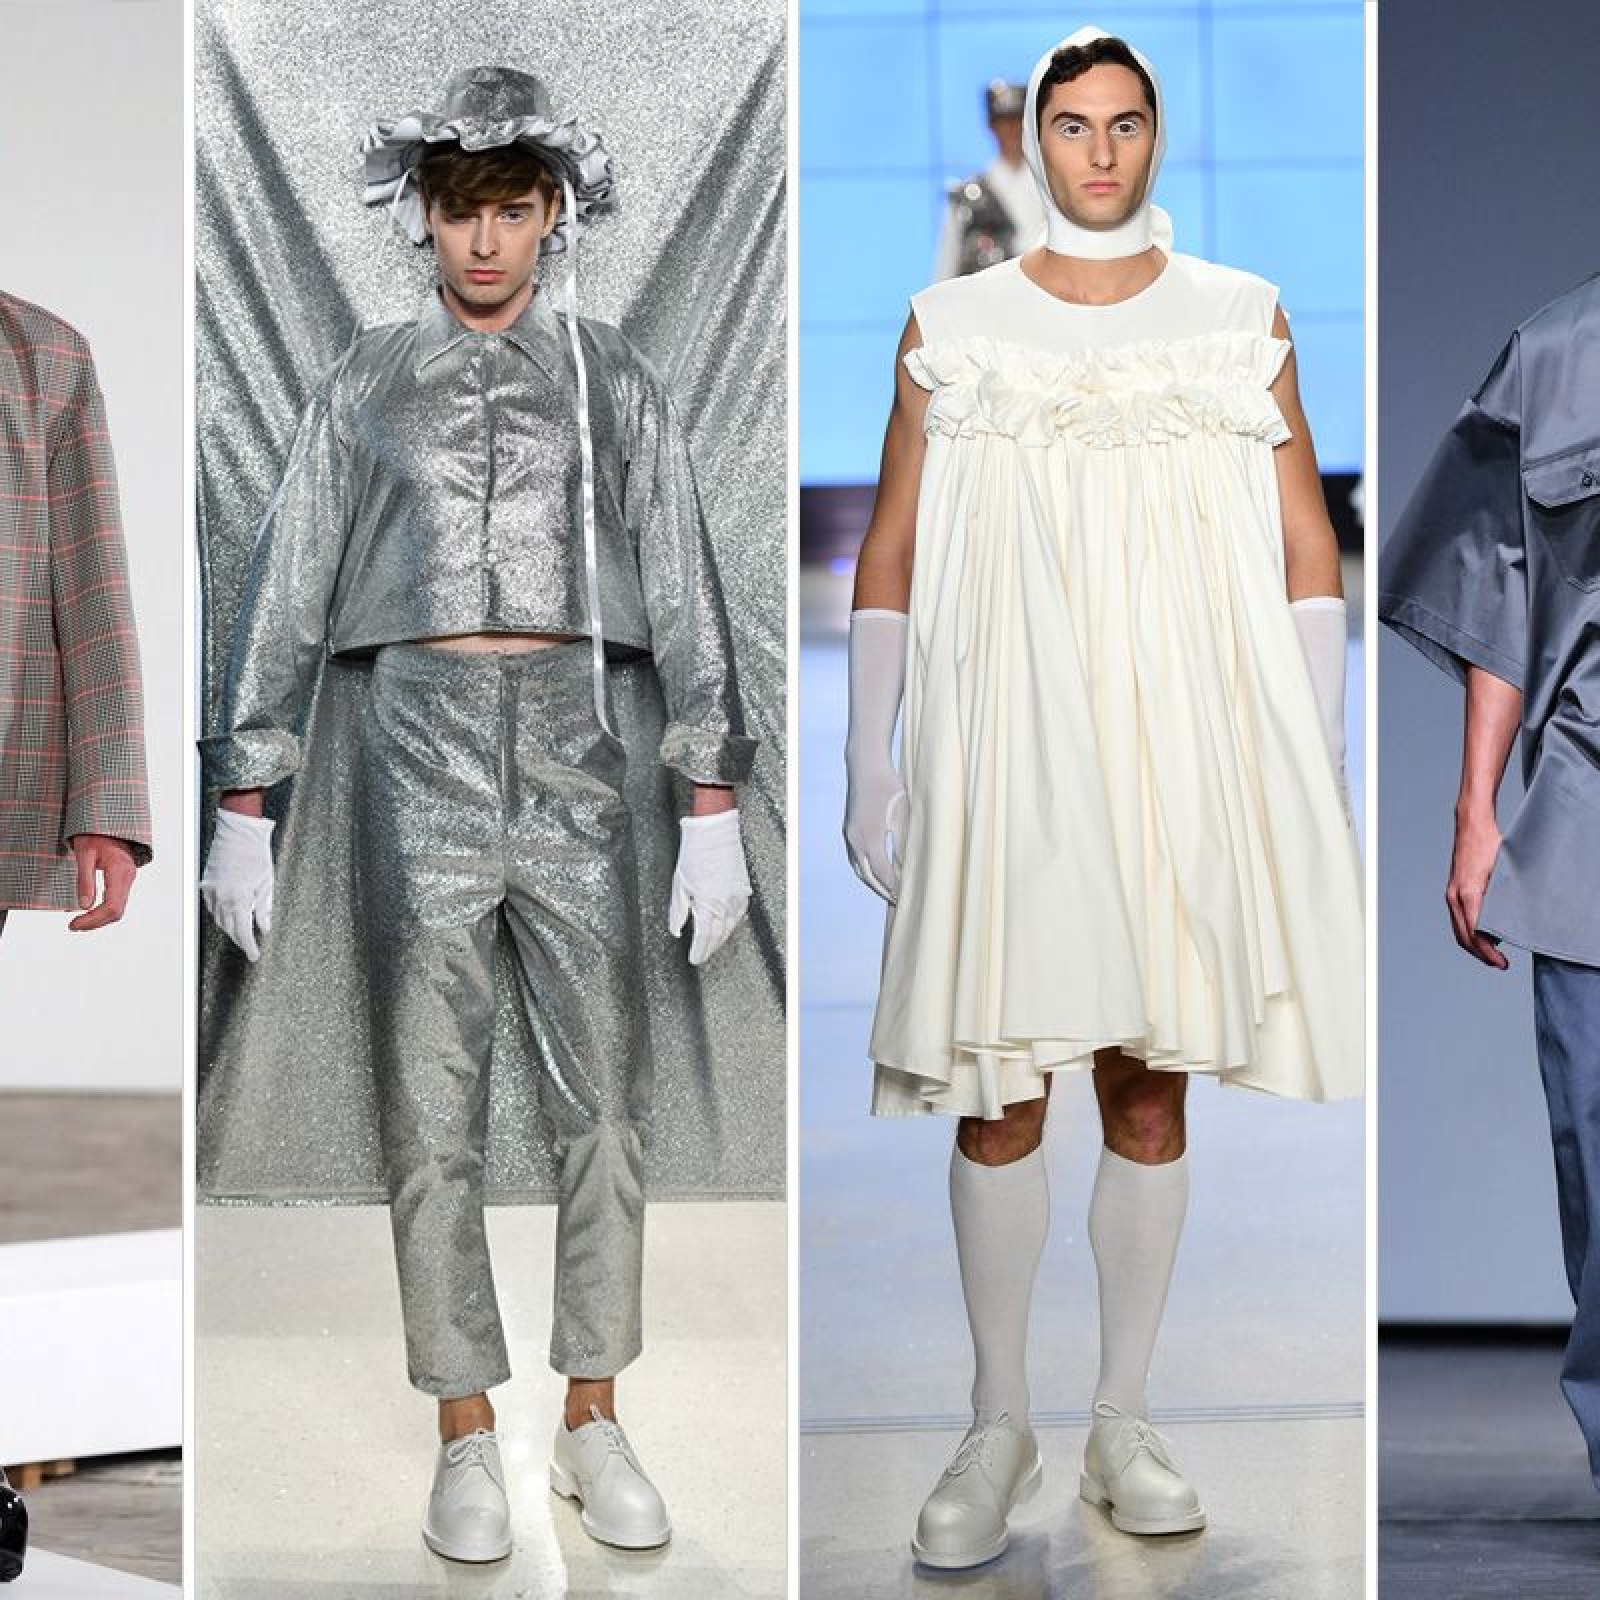 Why Do I Suddenly Care So Much About Men's Fashion Week?